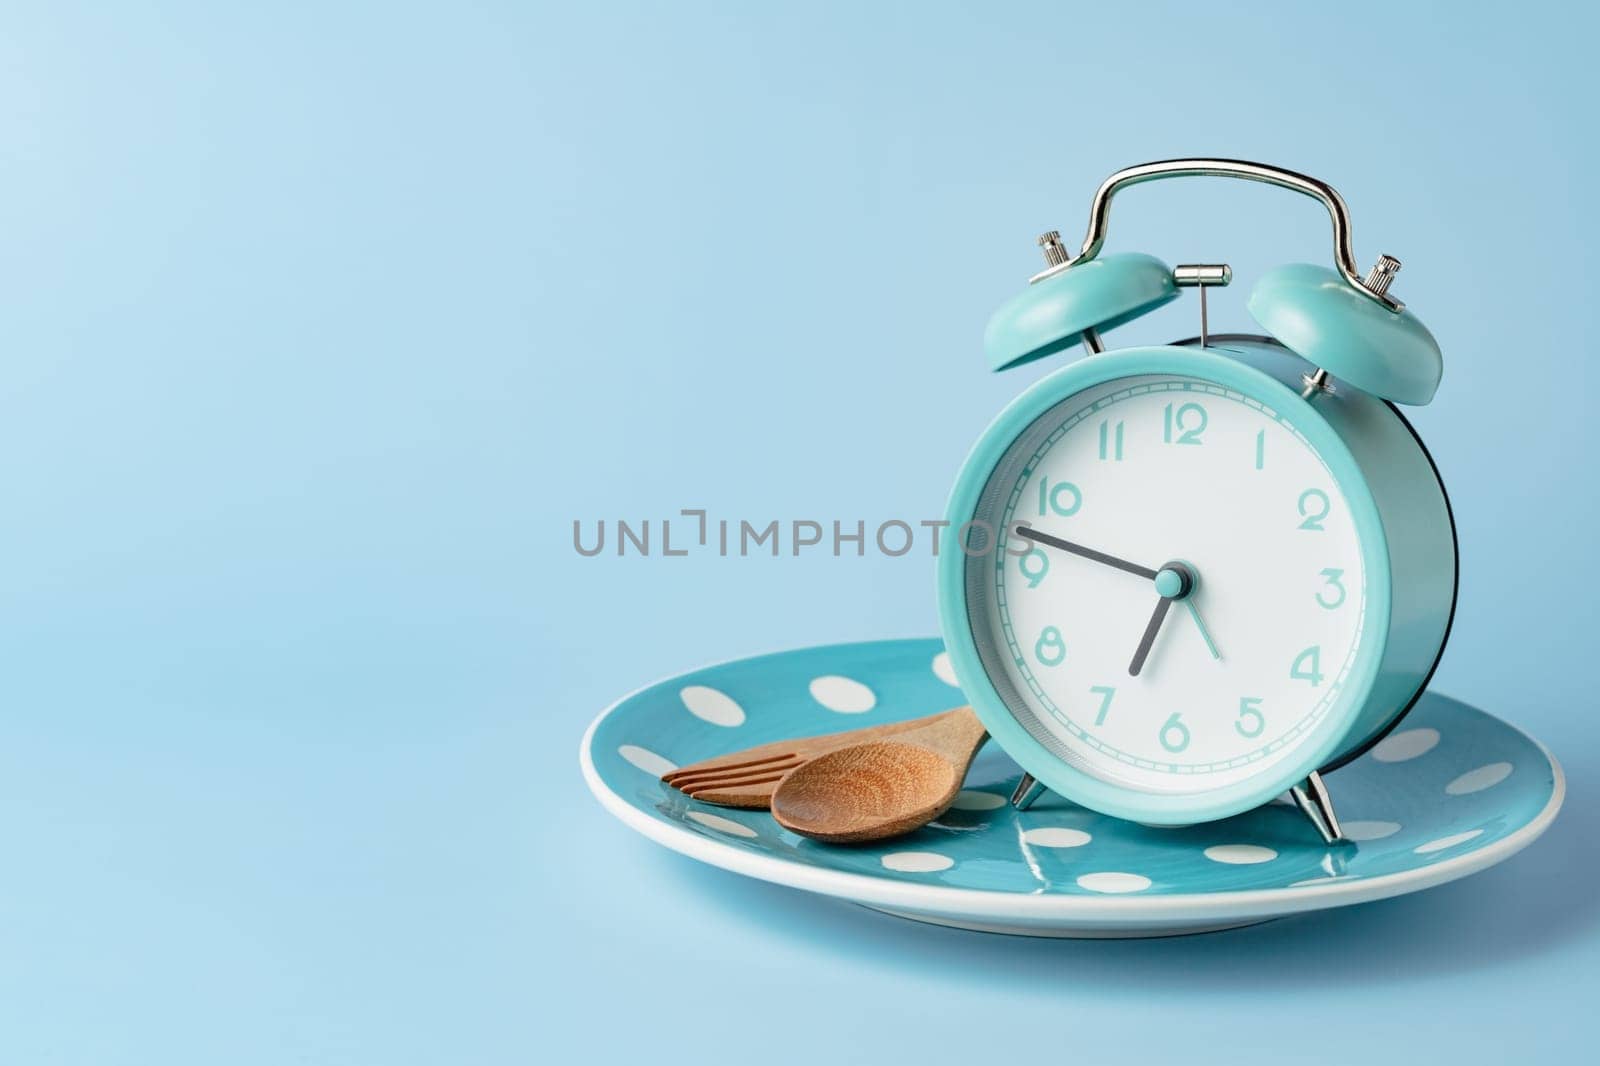 An alarm clock on an empty plate and cutlery set against blue background for the concept of food, time management, losing weight and eating on time.